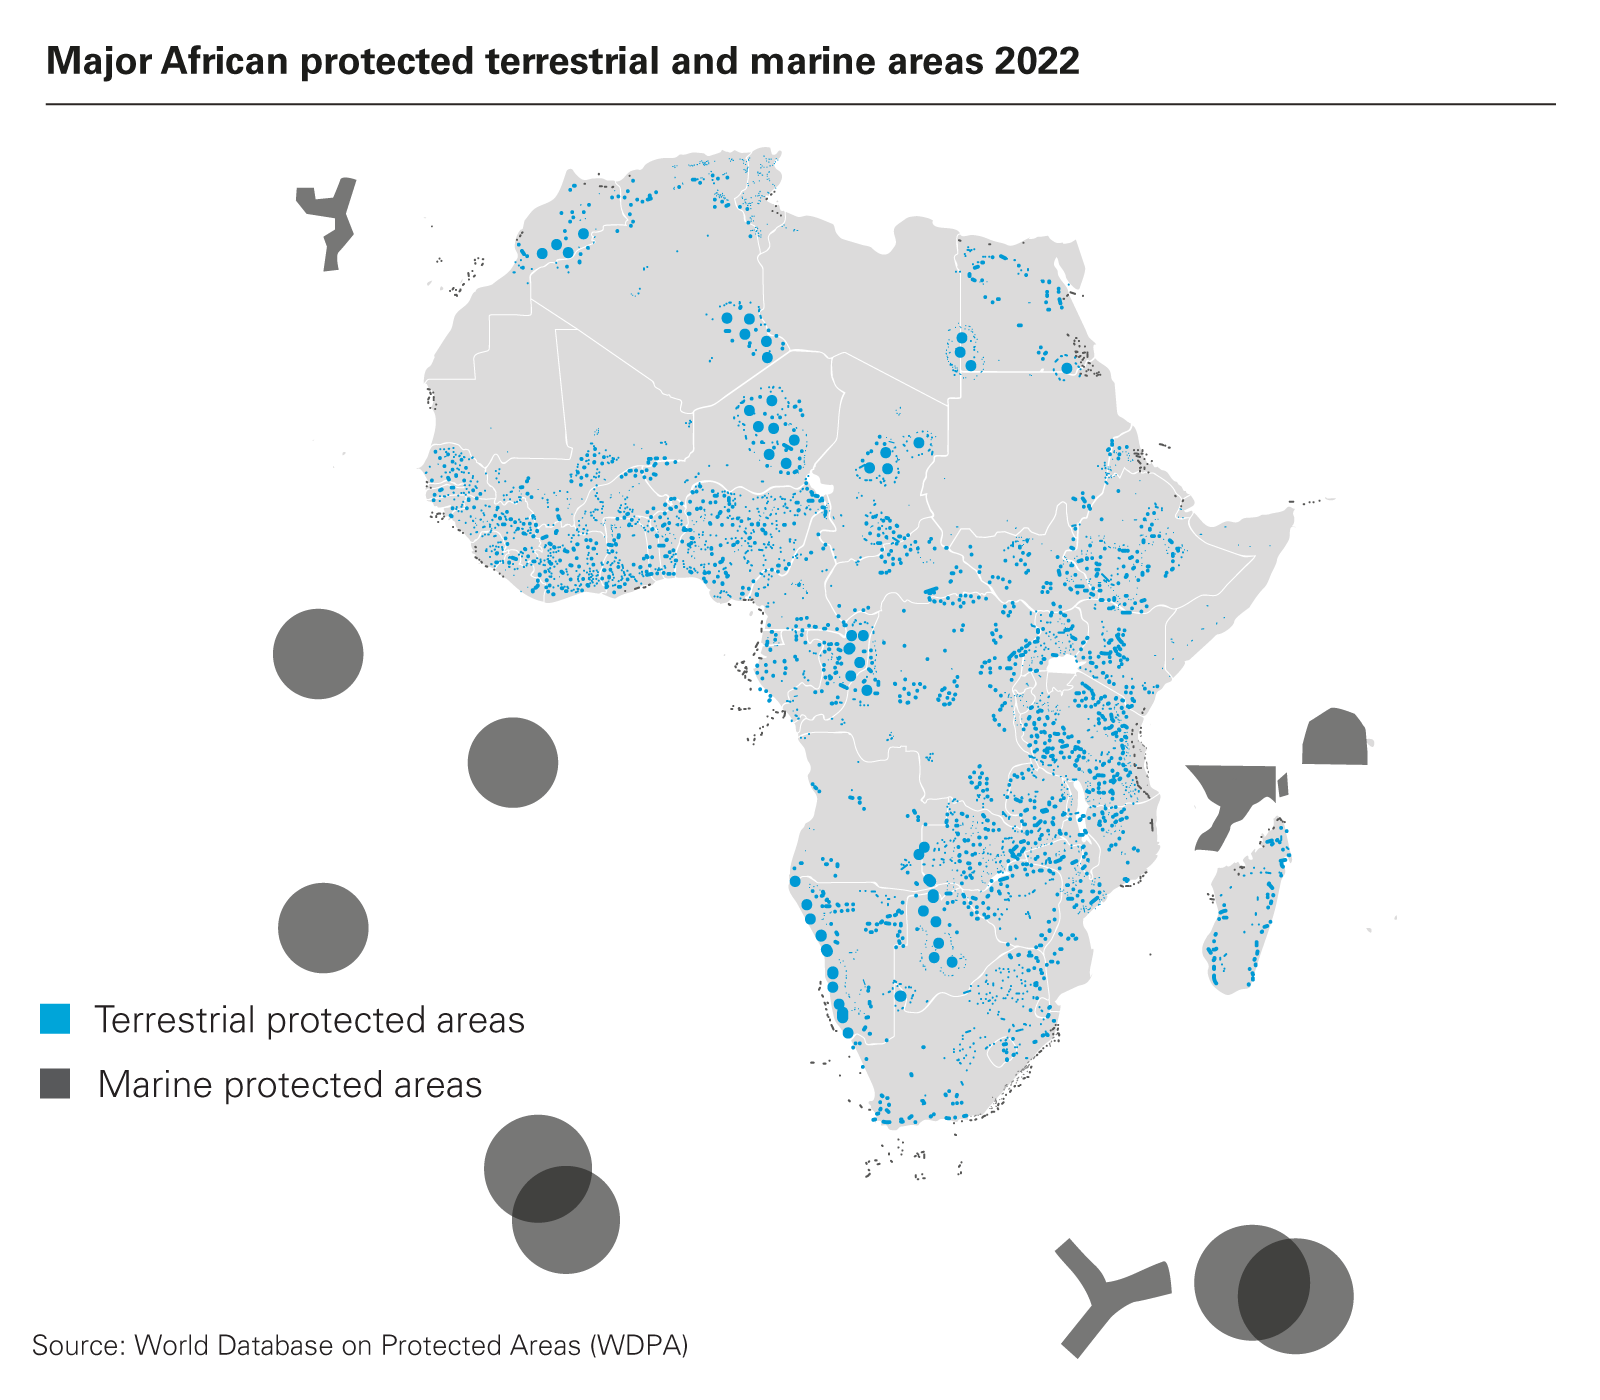 Major African protected terrestrial and marine areas 2022